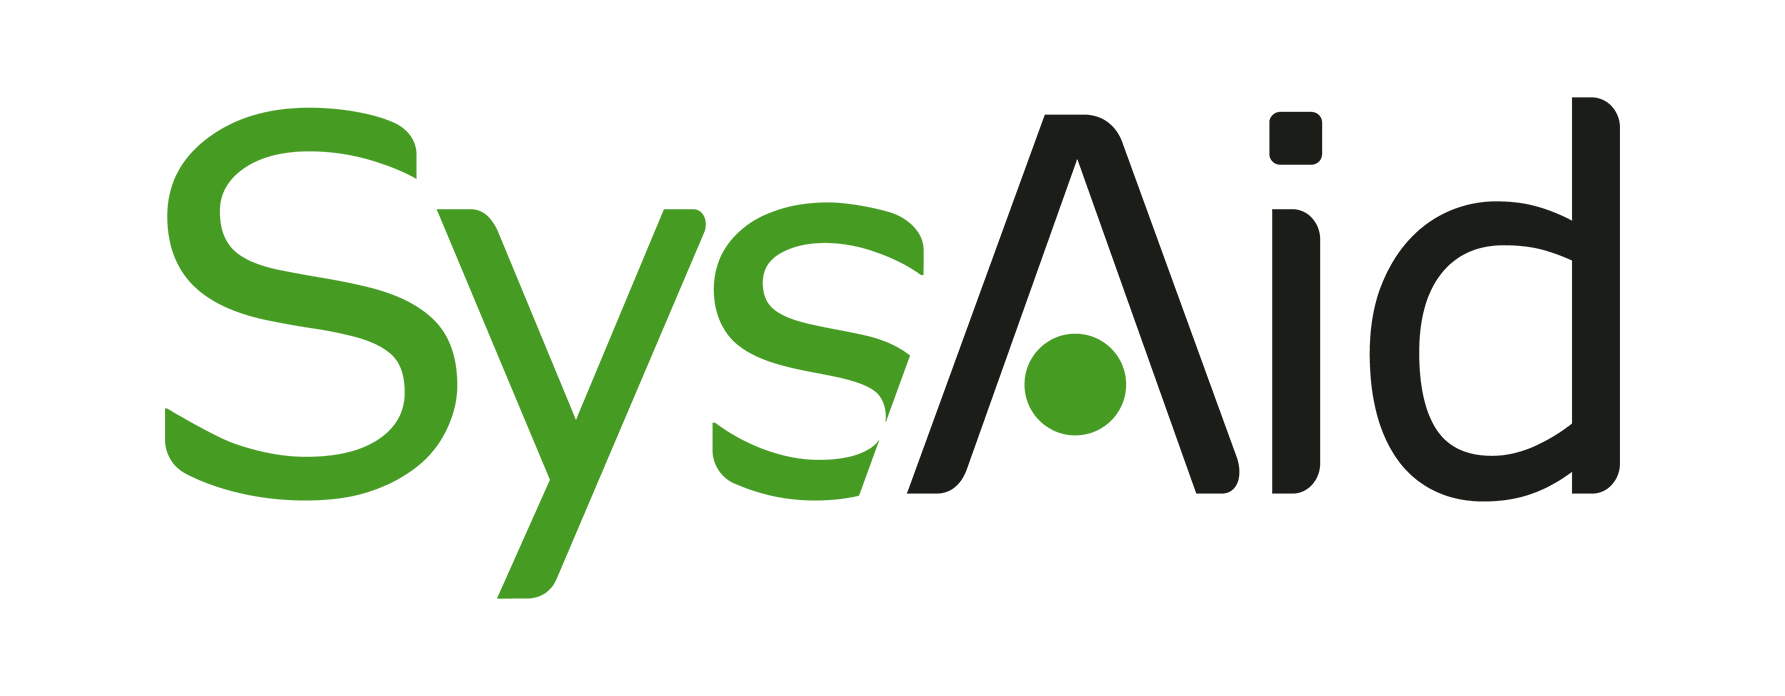 SysAid-logo.png